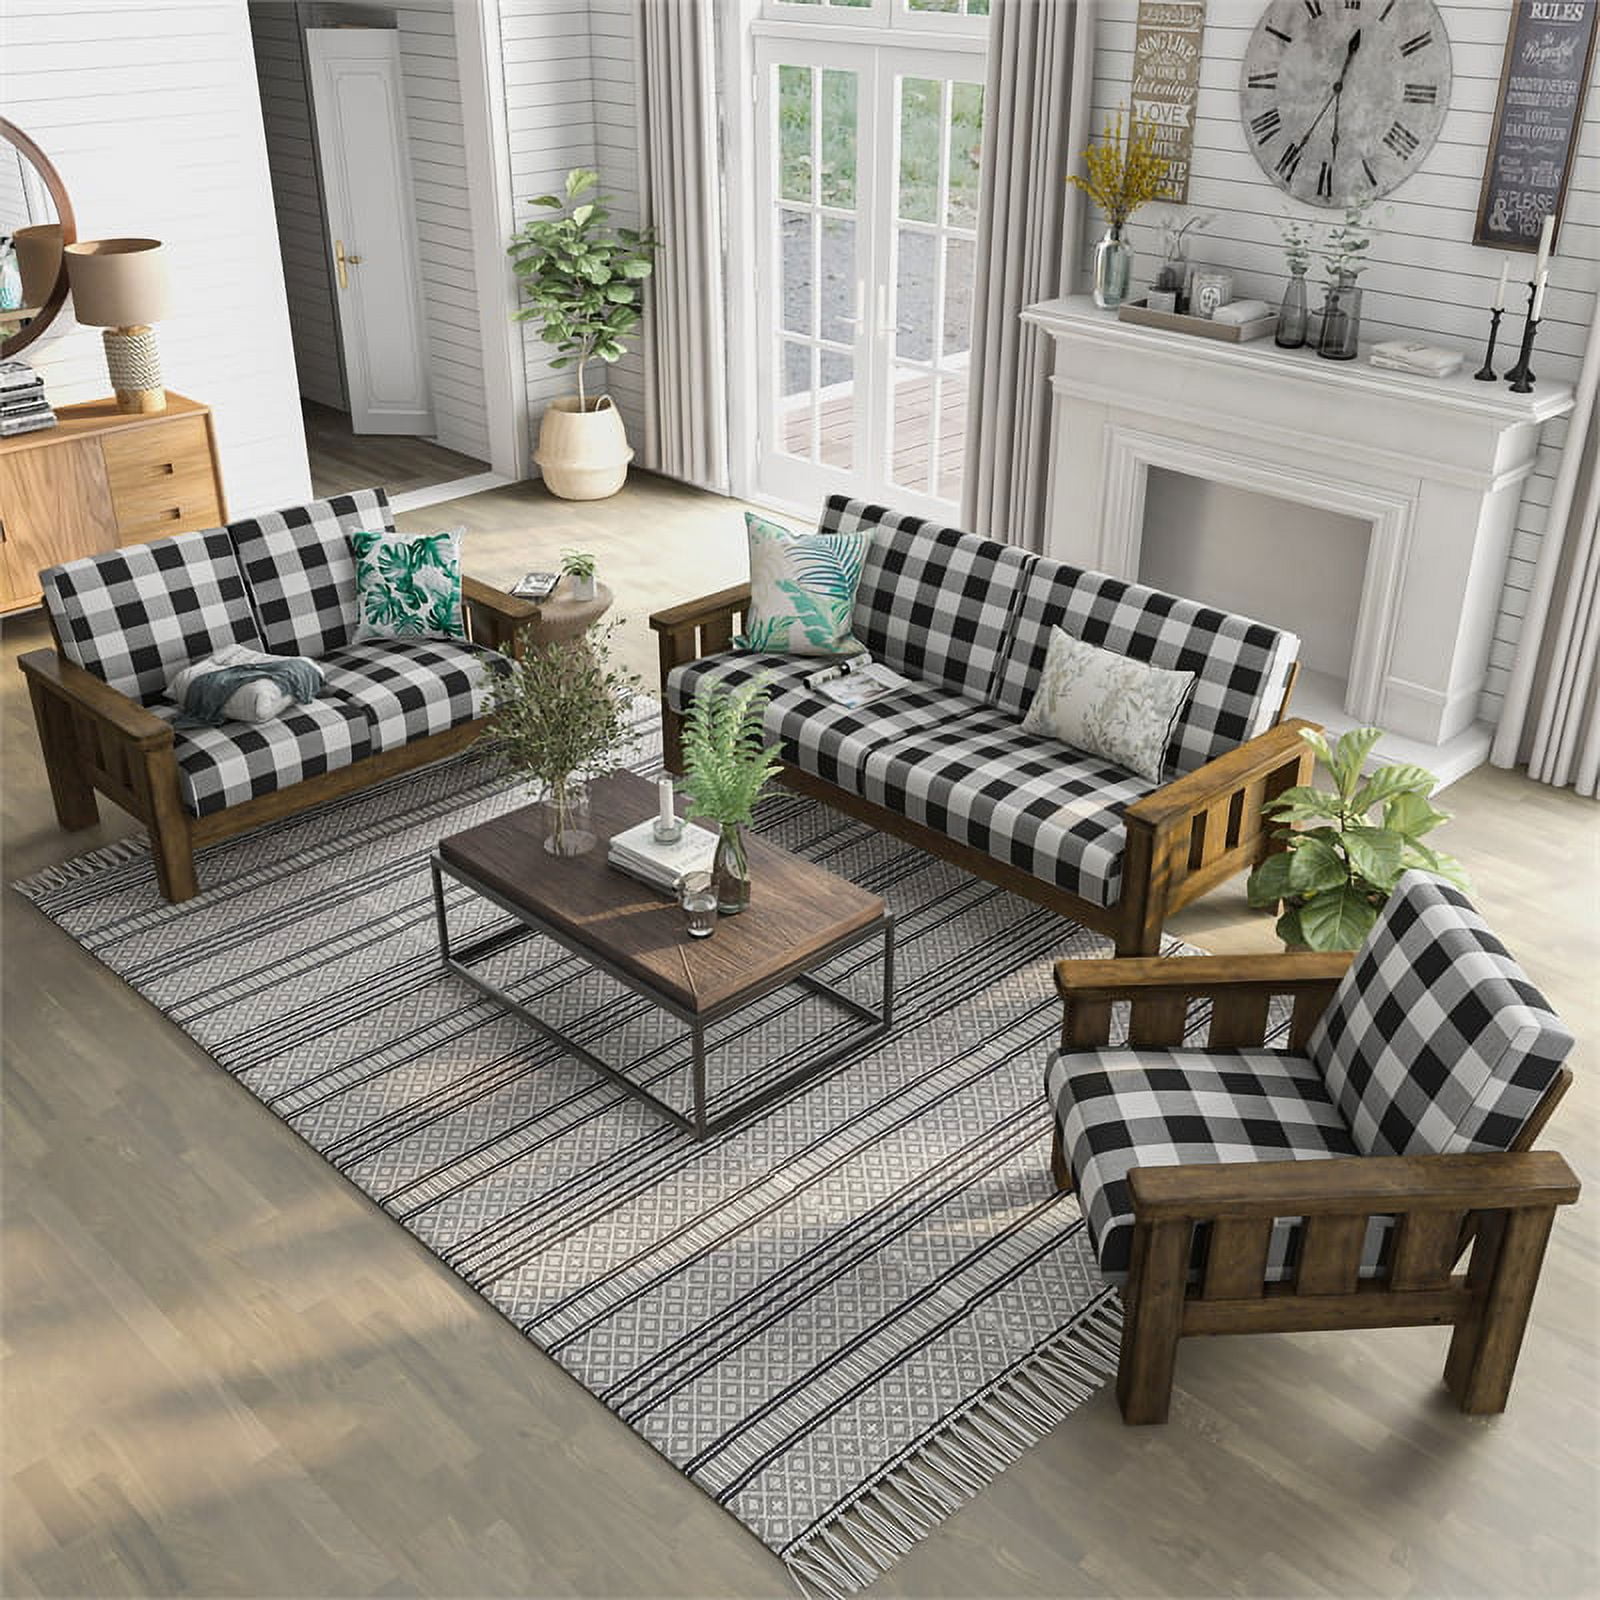 Furniture of America Tally Wood 3-Piece Plaid Sofa Set in Brown